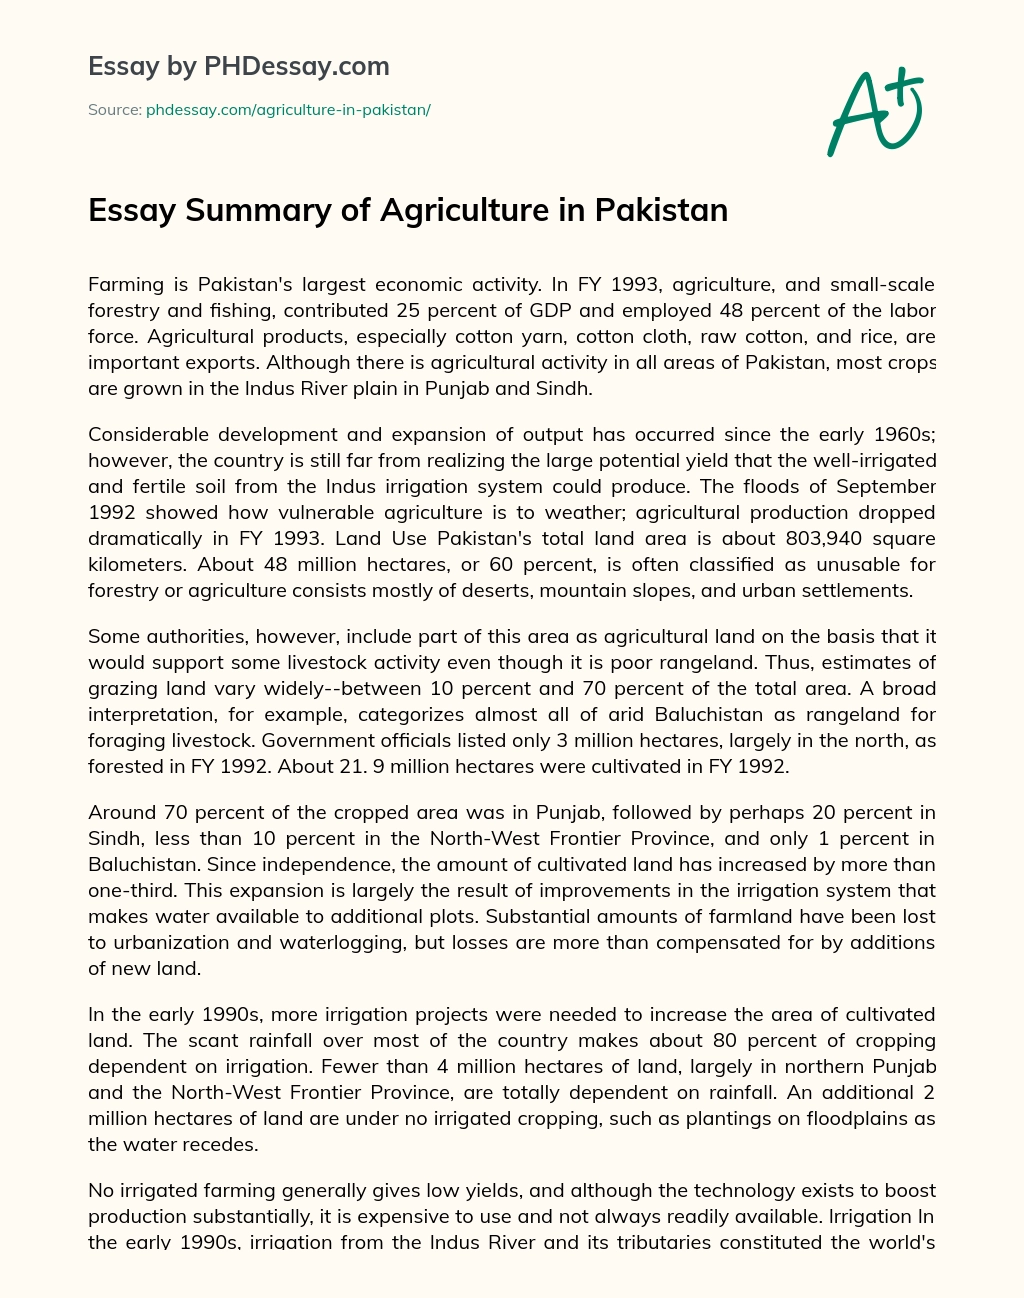 Essay Summary of Agriculture in Pakistan essay